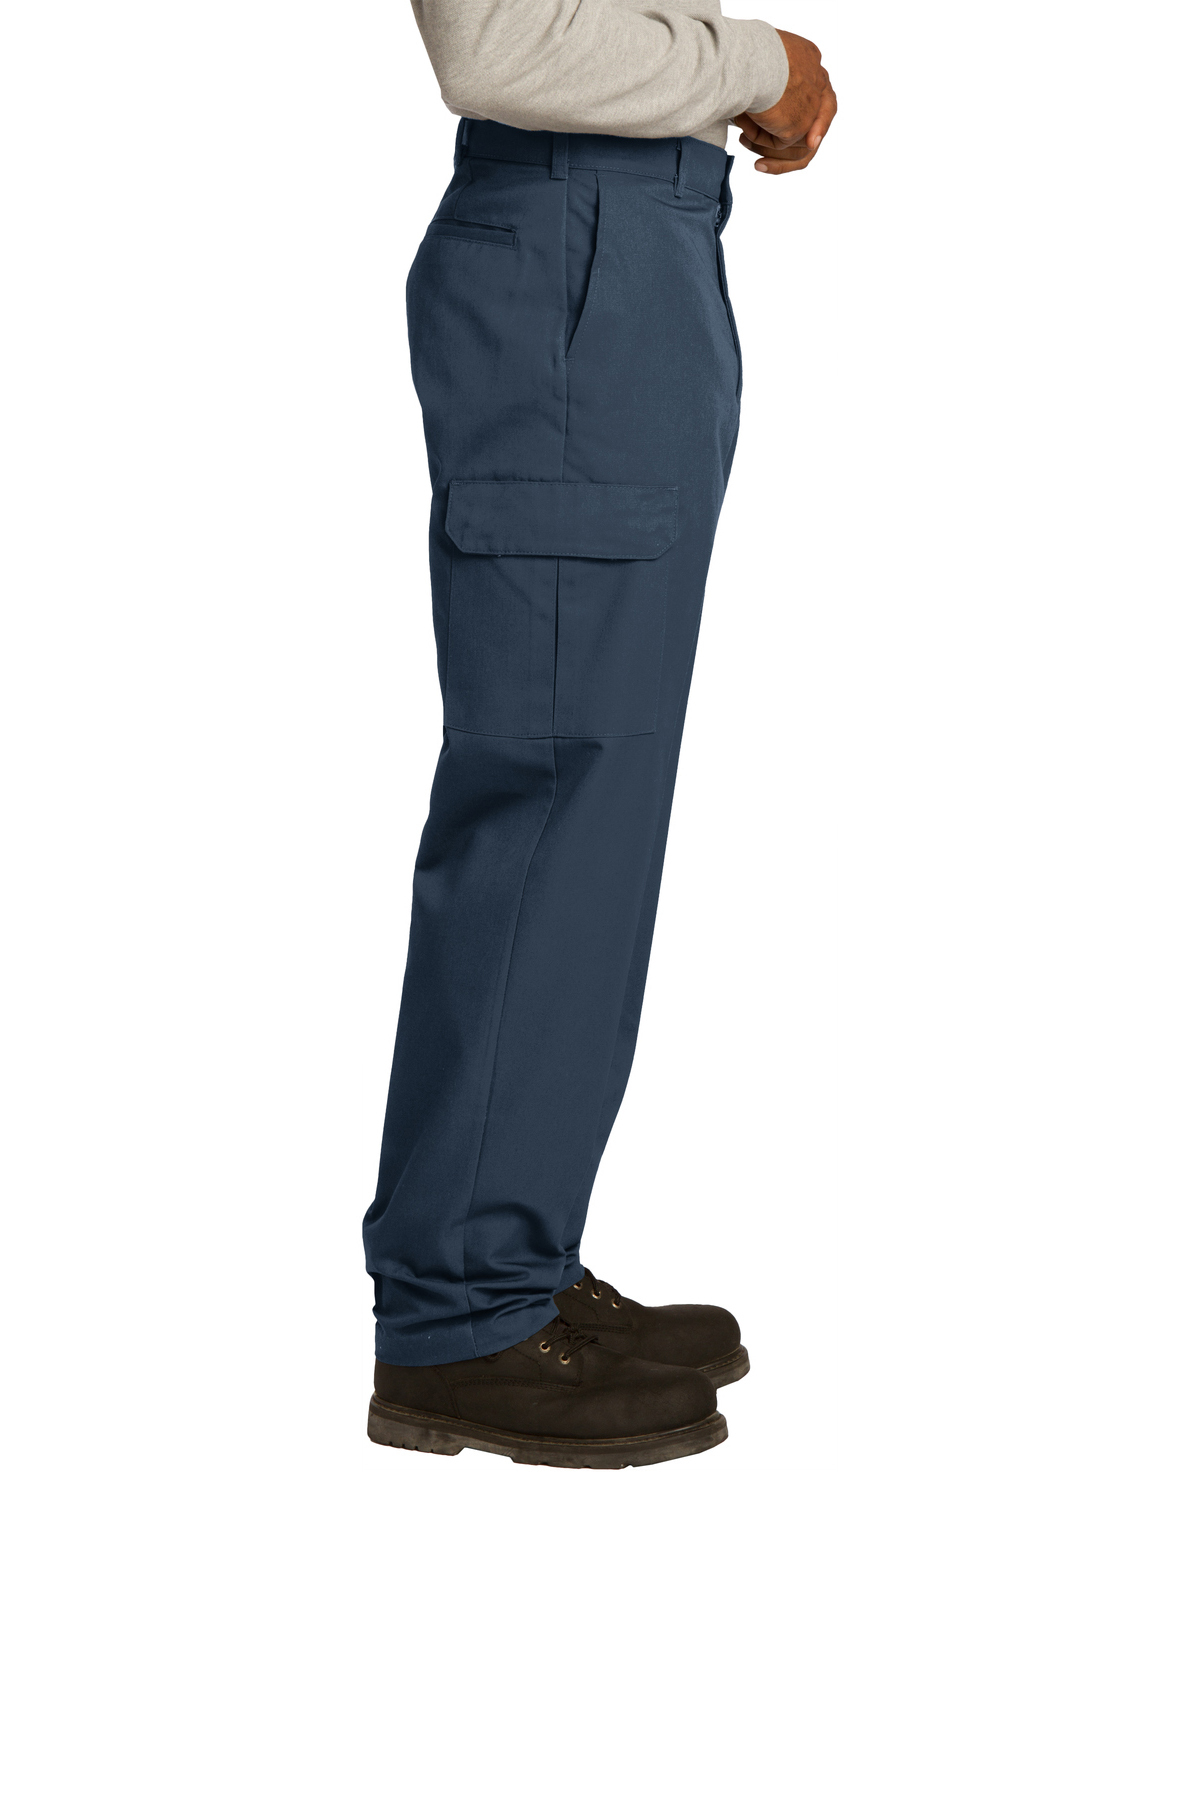 Red Kap Industrial Cargo Pant | Product | Company Casuals